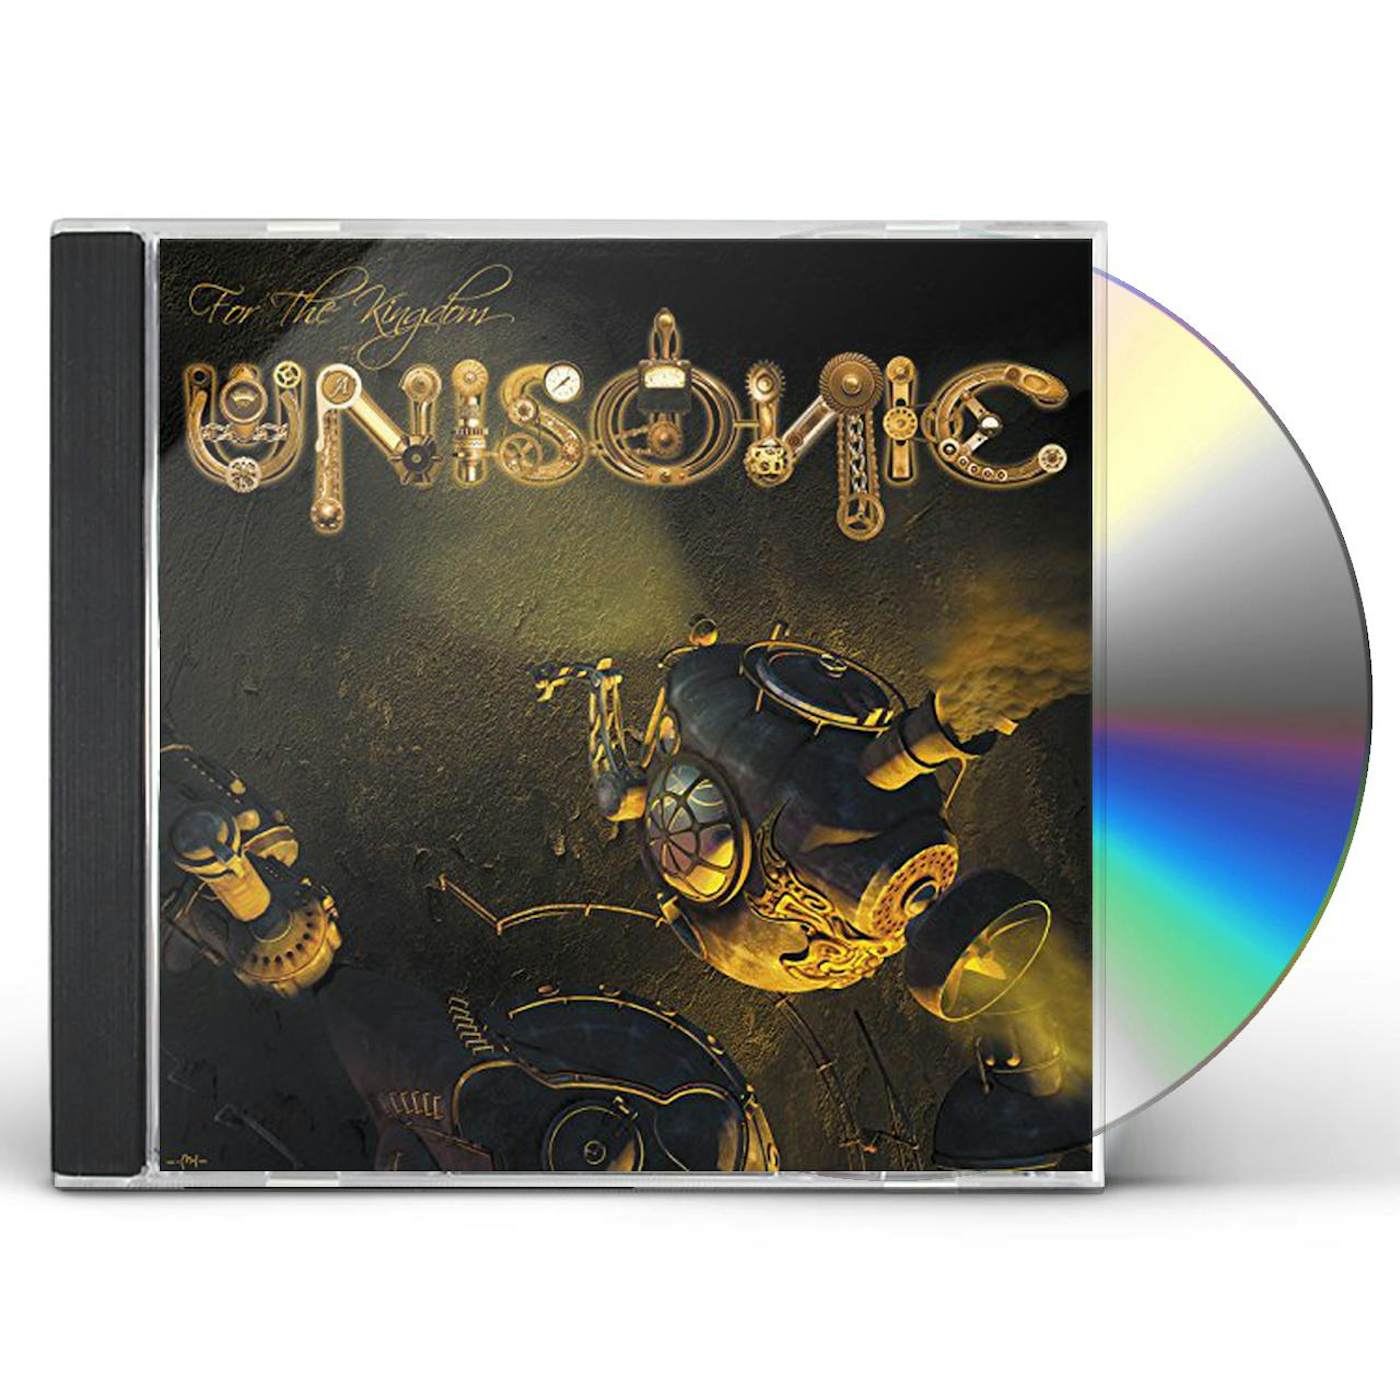 Unisonic FOR THE KINGDOM EP CD